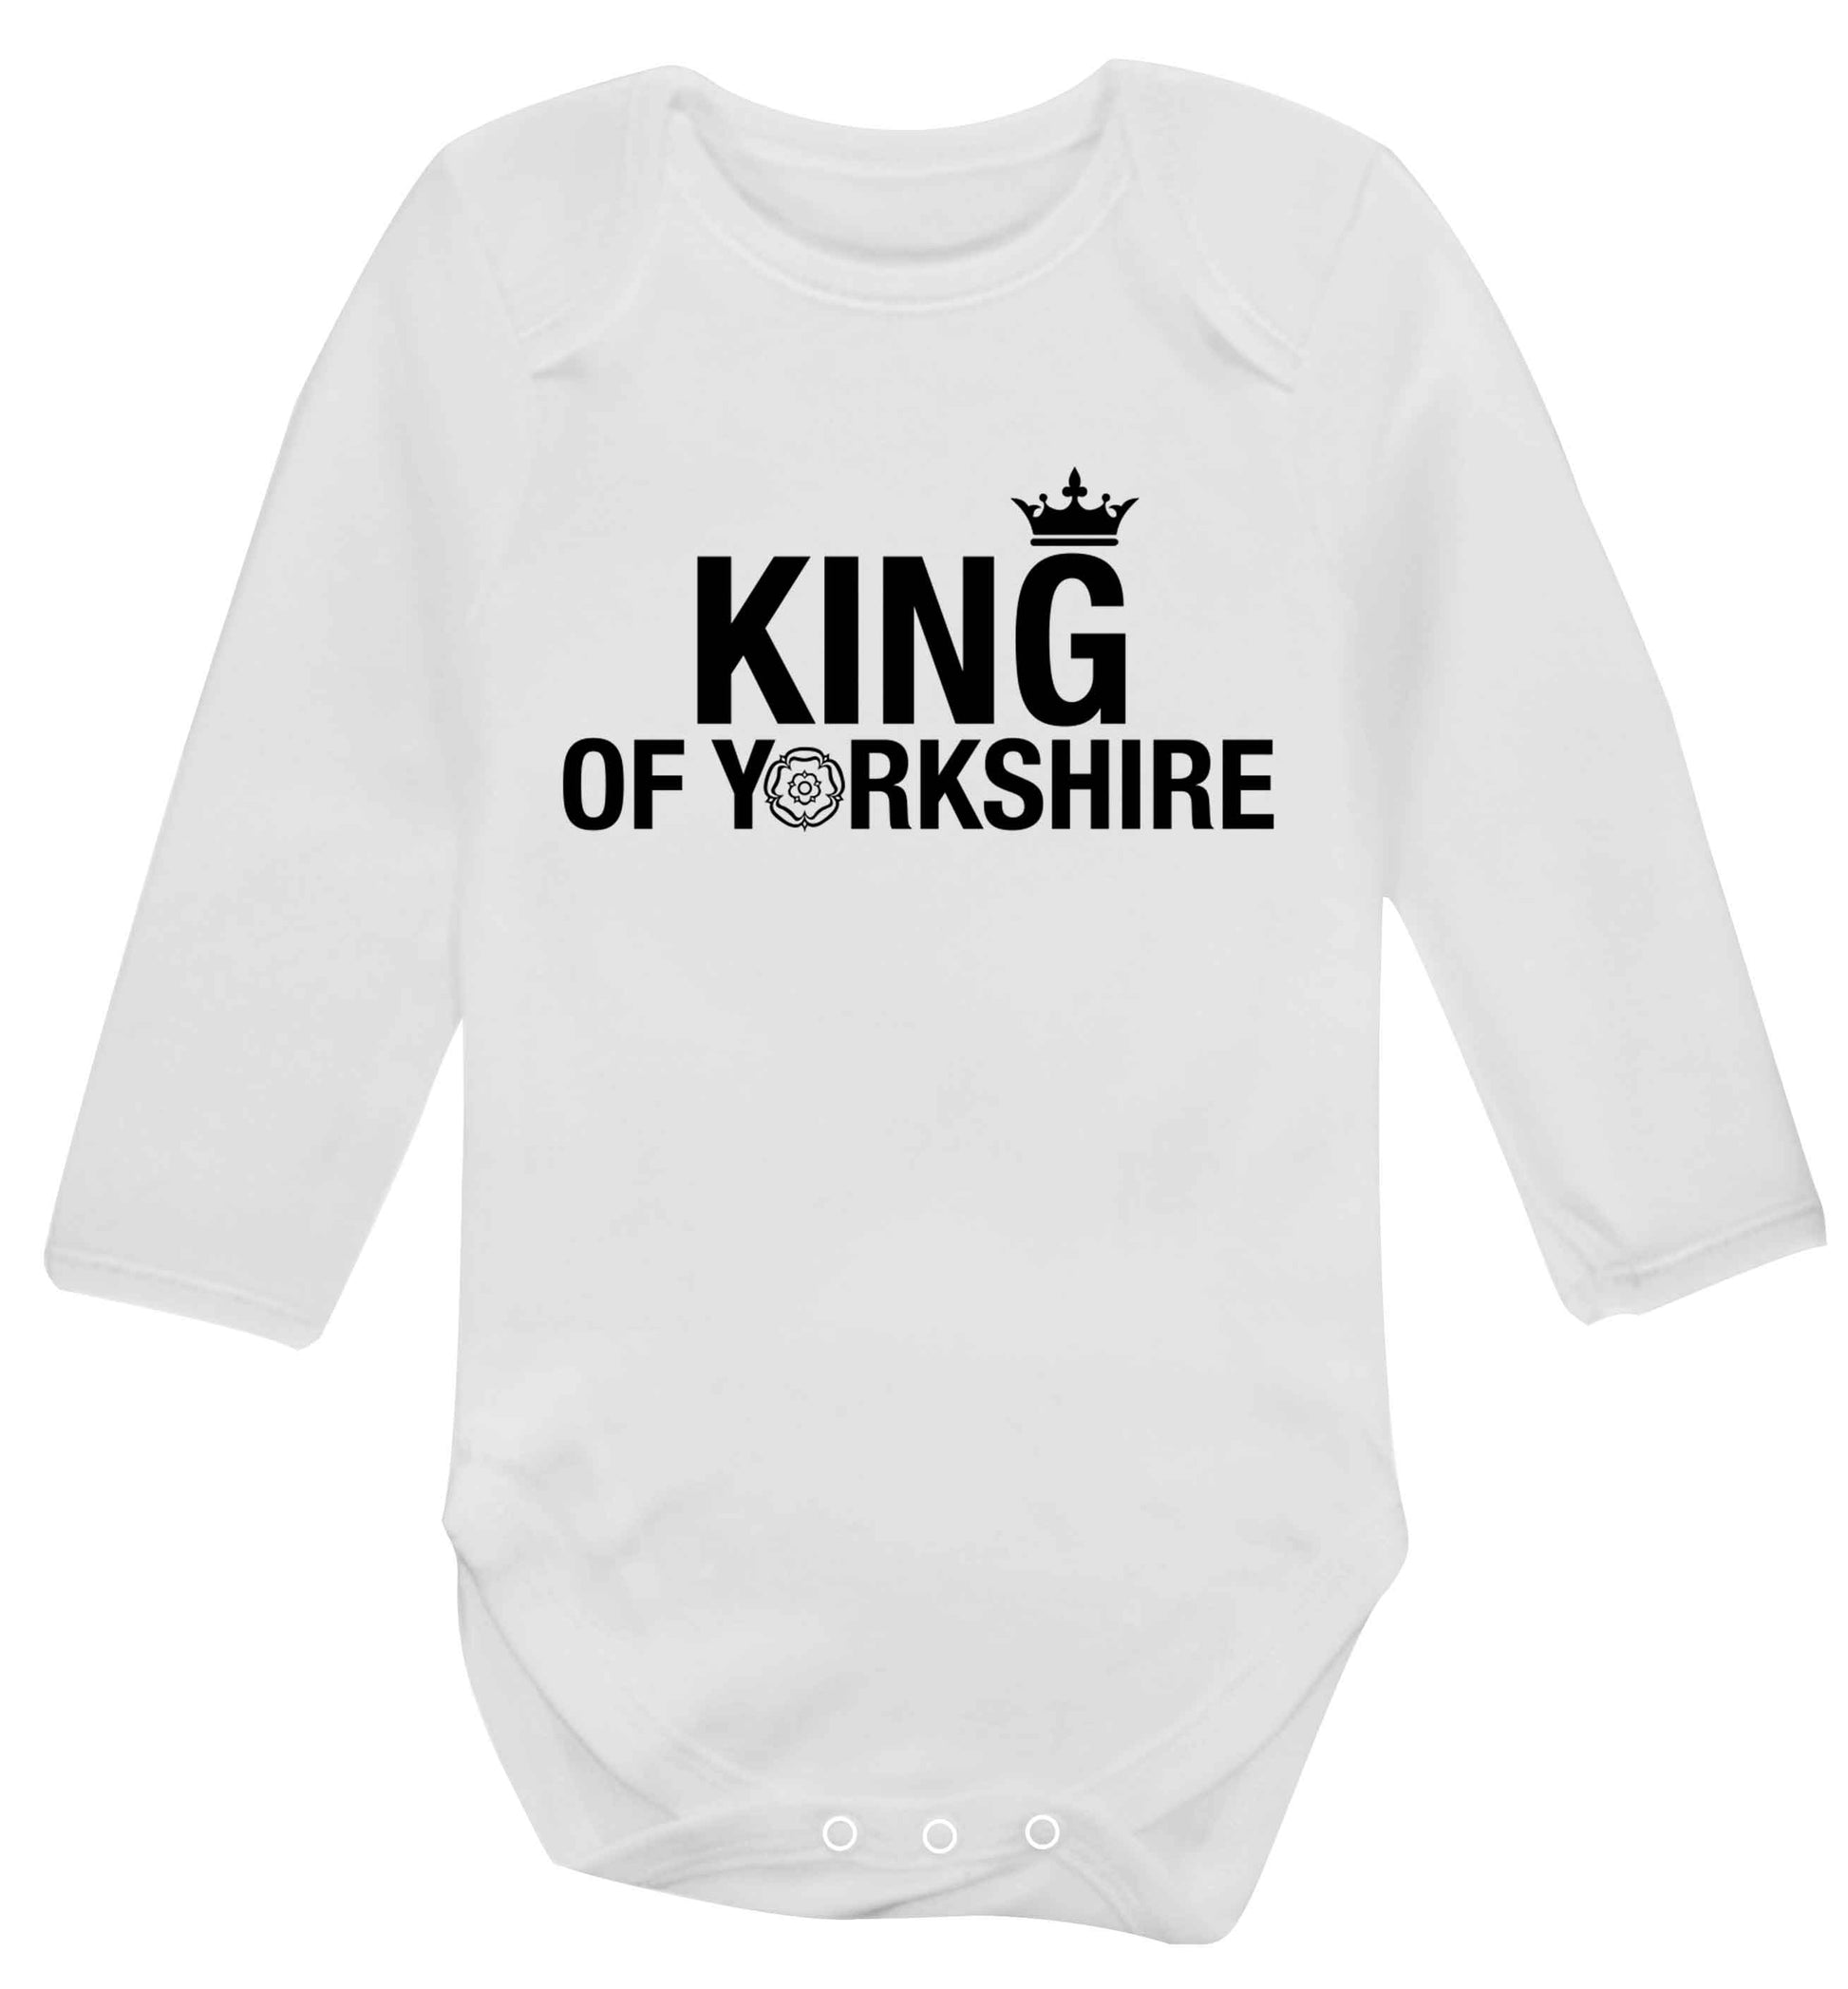 King of Yorkshire Baby Vest long sleeved white 6-12 months